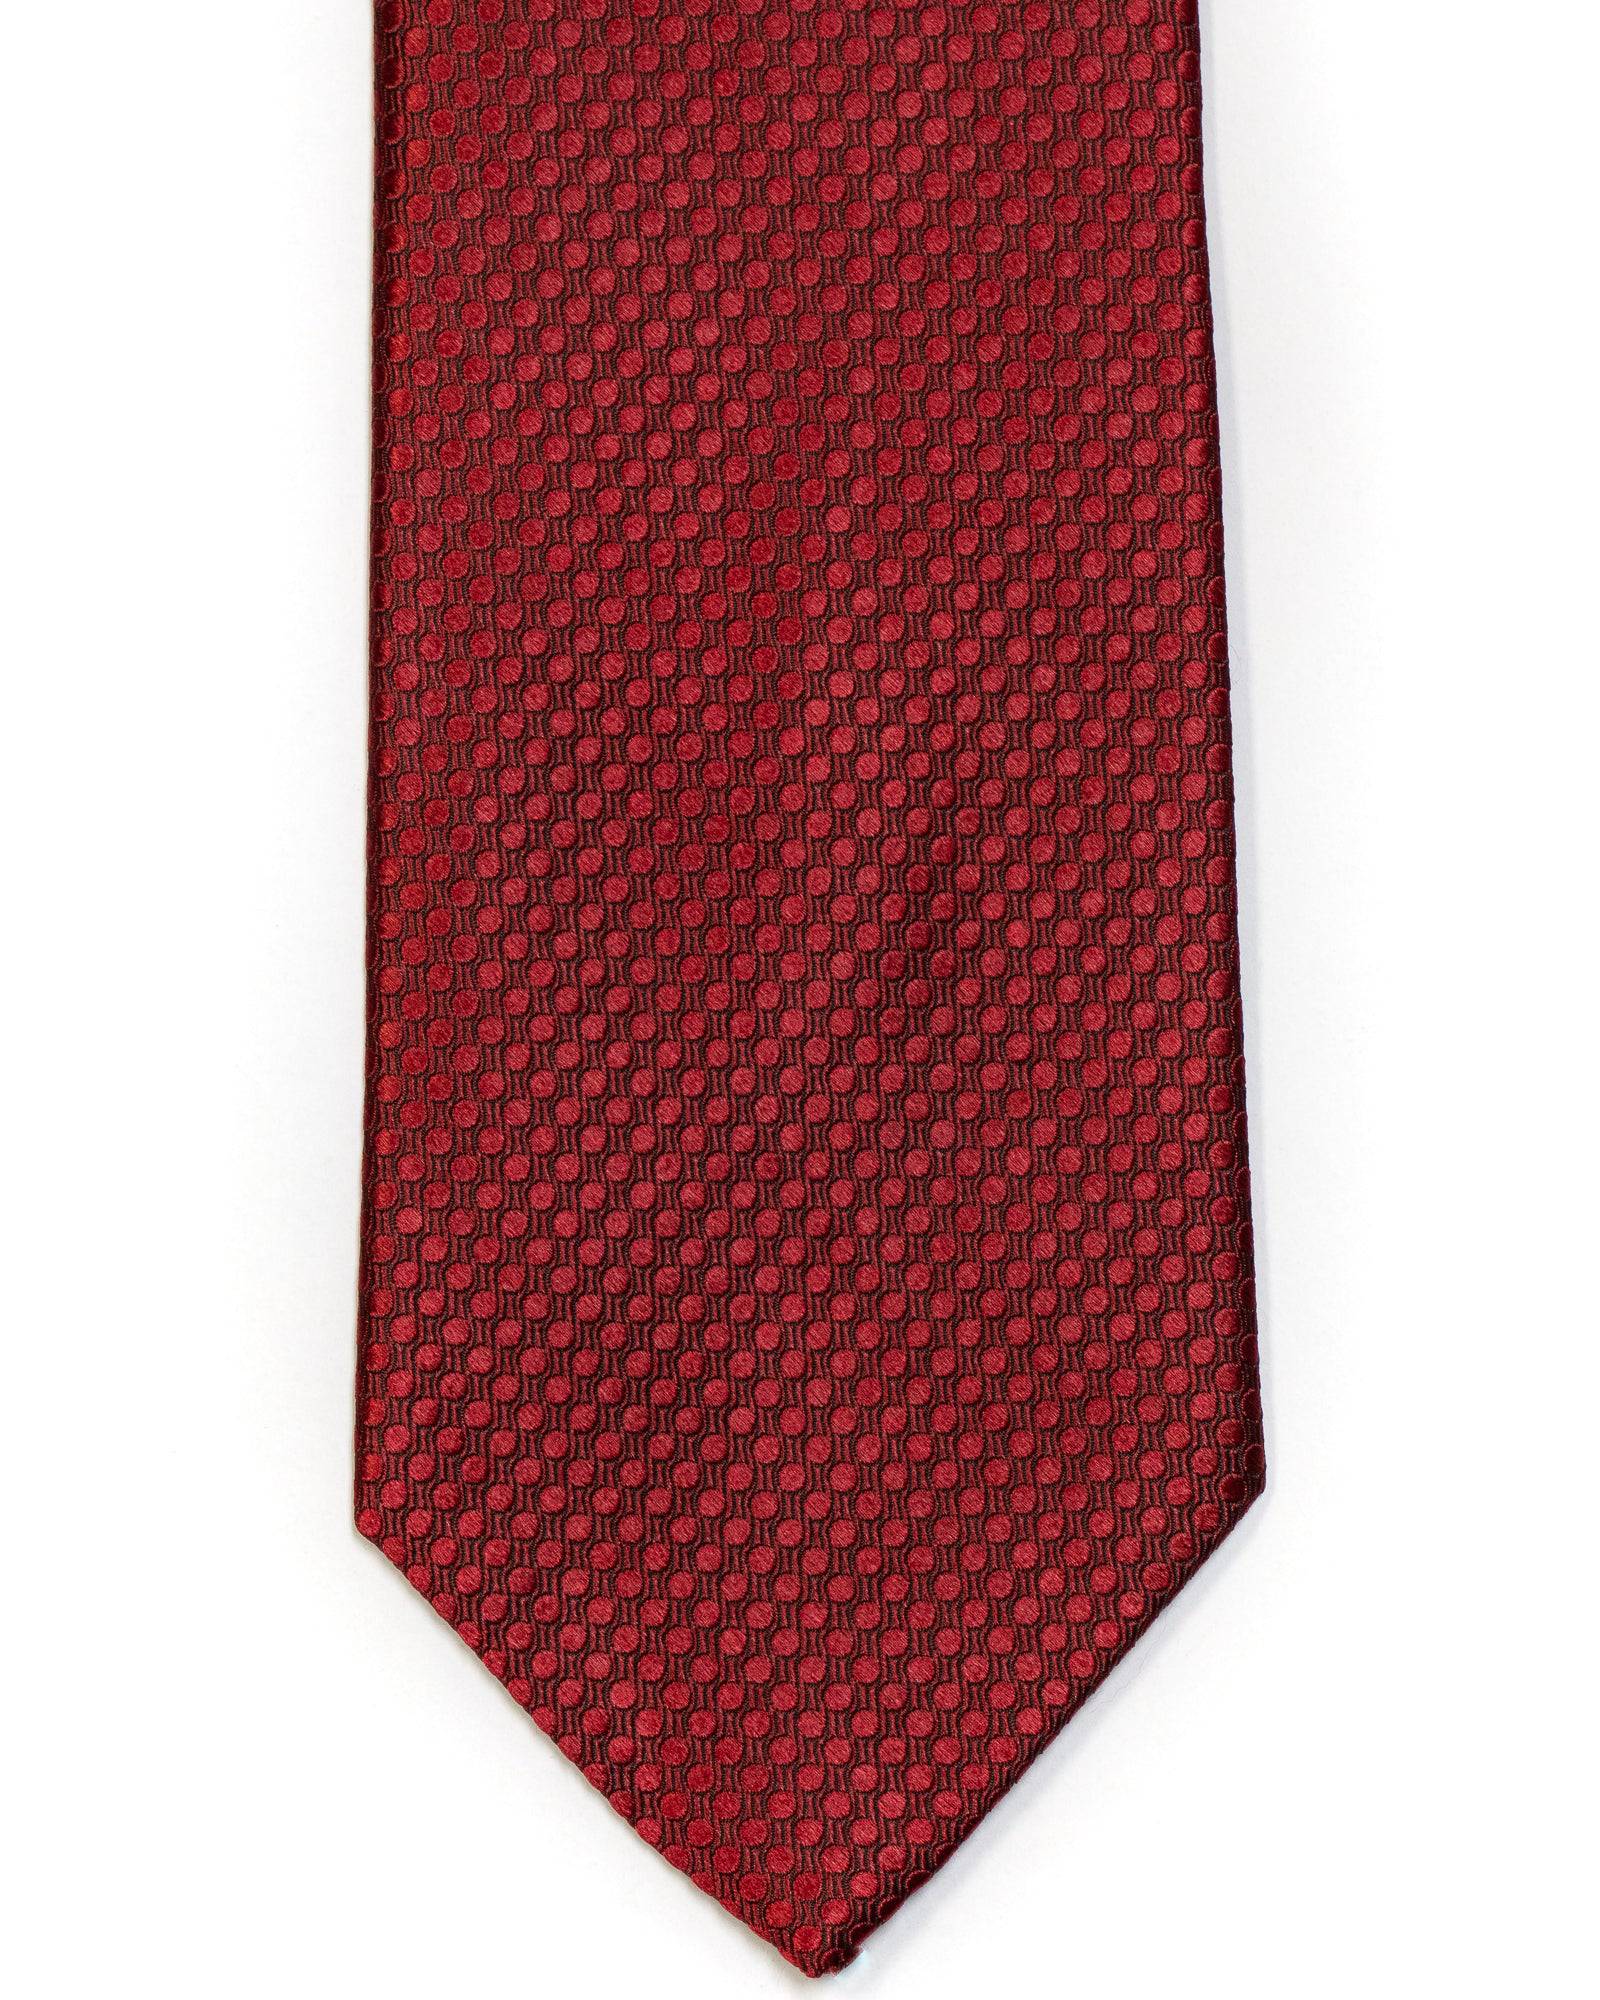 Silk Tie In Deep Red Circle Jacquard Design Solid - Rainwater's Men's Clothing and Tuxedo Rental